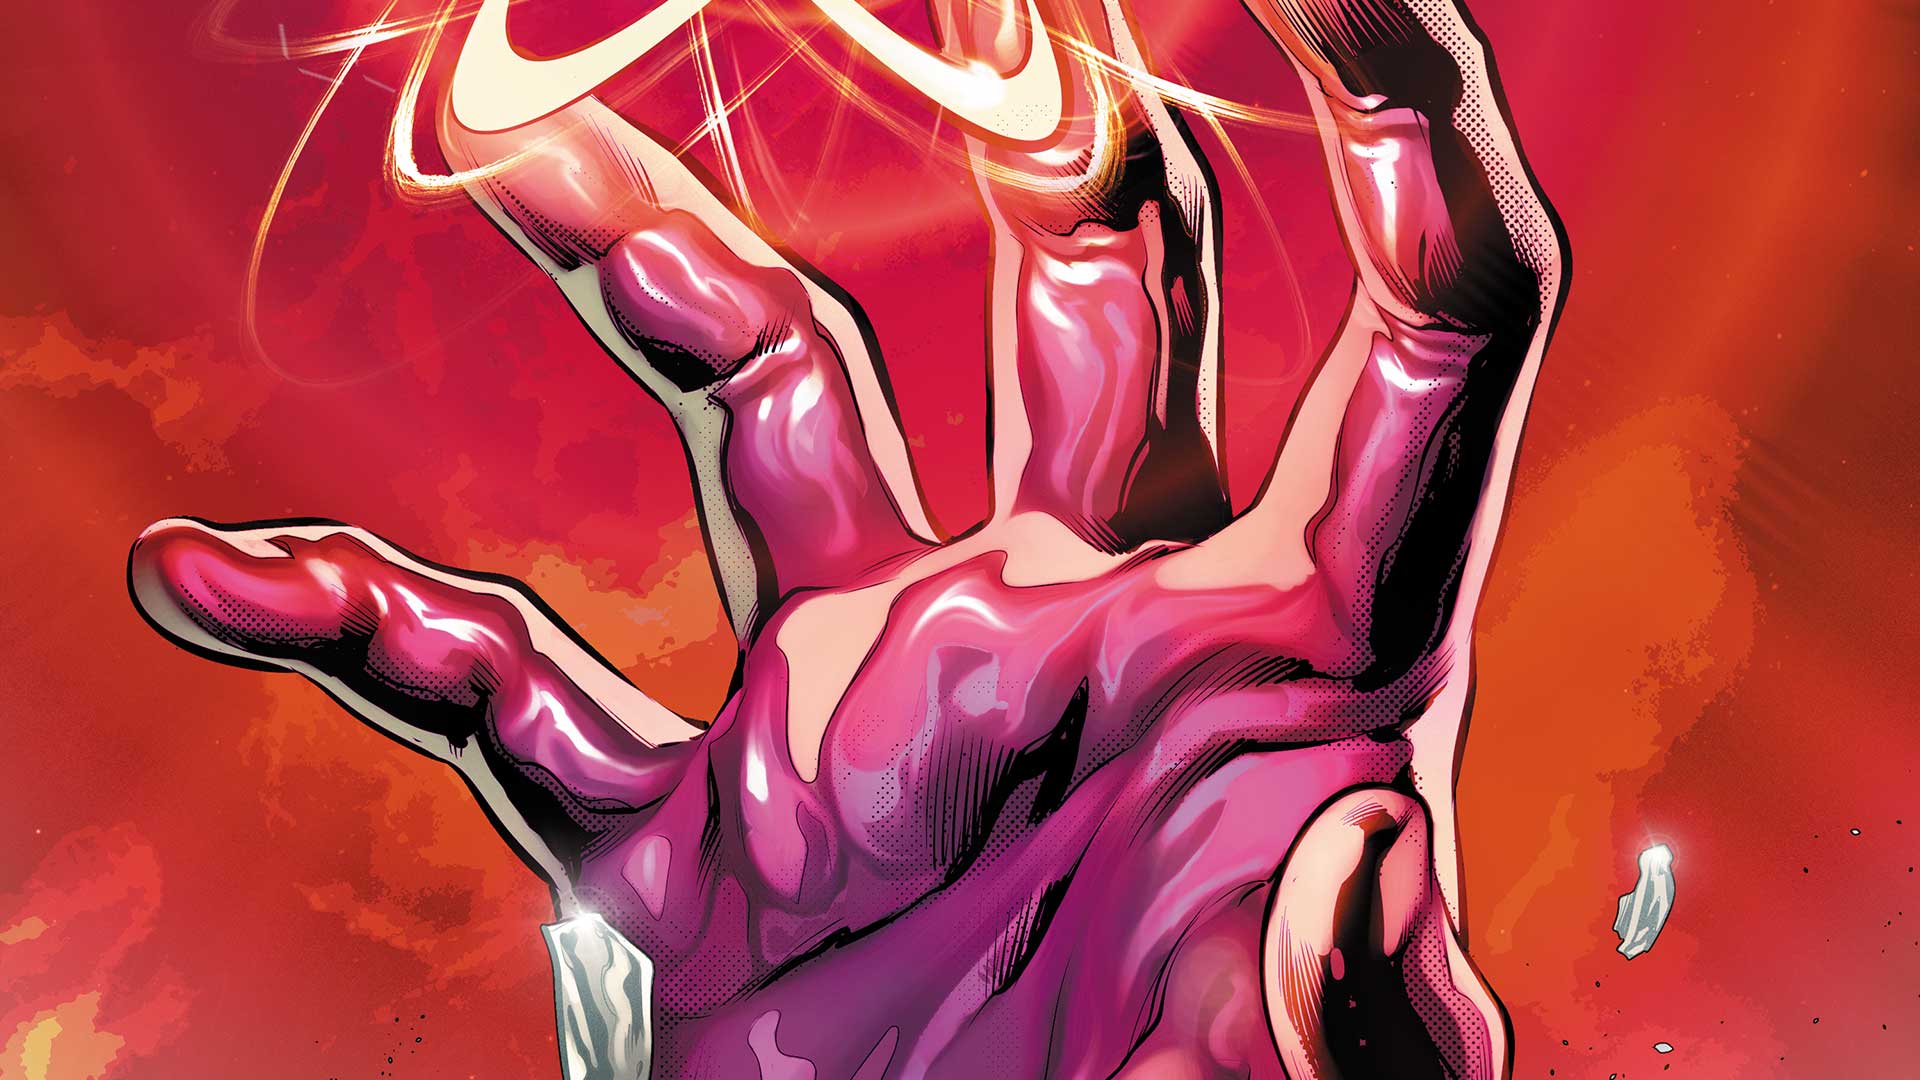 Being A Hero Isn’t About Having Powers in The Fall and Rise of Captain Atom #2